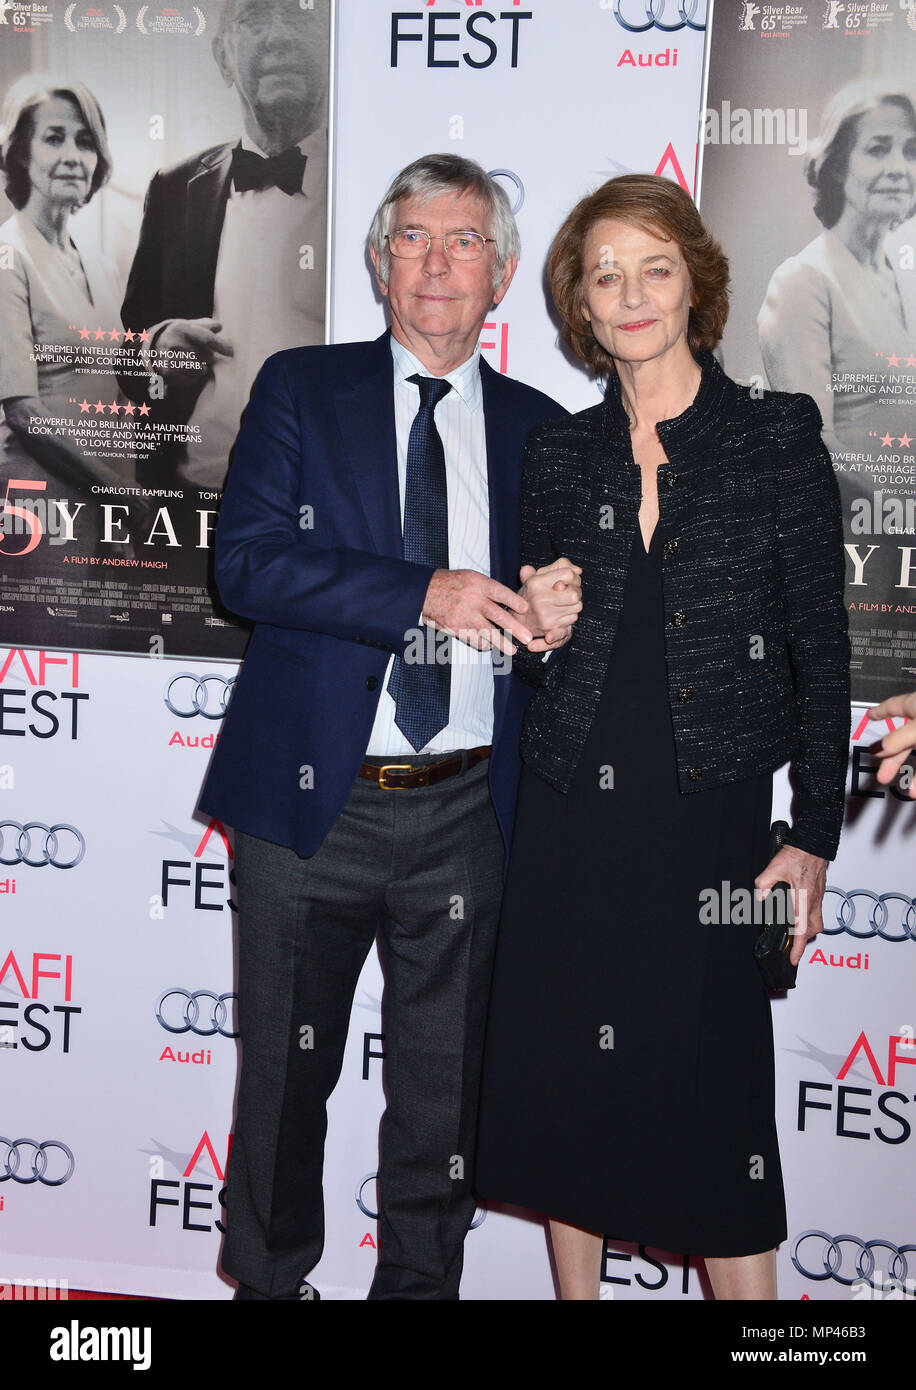 Charlotte Rambling, Tom Courtenay 007 at the Tribute to Charlotte Rampling and Tom Courtenay at the AFI Film Festival, 45 years ,  at the TCL Chinese Theatre in Los Angeles. November 11, 2015.Charlotte Rambling, Tom Courtenay 007 ------------- Red Carpet Event, Vertical, USA, Film Industry, Celebrities,  Photography, Bestof, Arts Culture and Entertainment, Topix Celebrities fashion /  Vertical, Best of, Event in Hollywood Life - California,  Red Carpet and backstage, USA, Film Industry, Celebrities,  movie celebrities, TV celebrities, Music celebrities, Photography, Bestof, Arts Culture and En Stock Photo